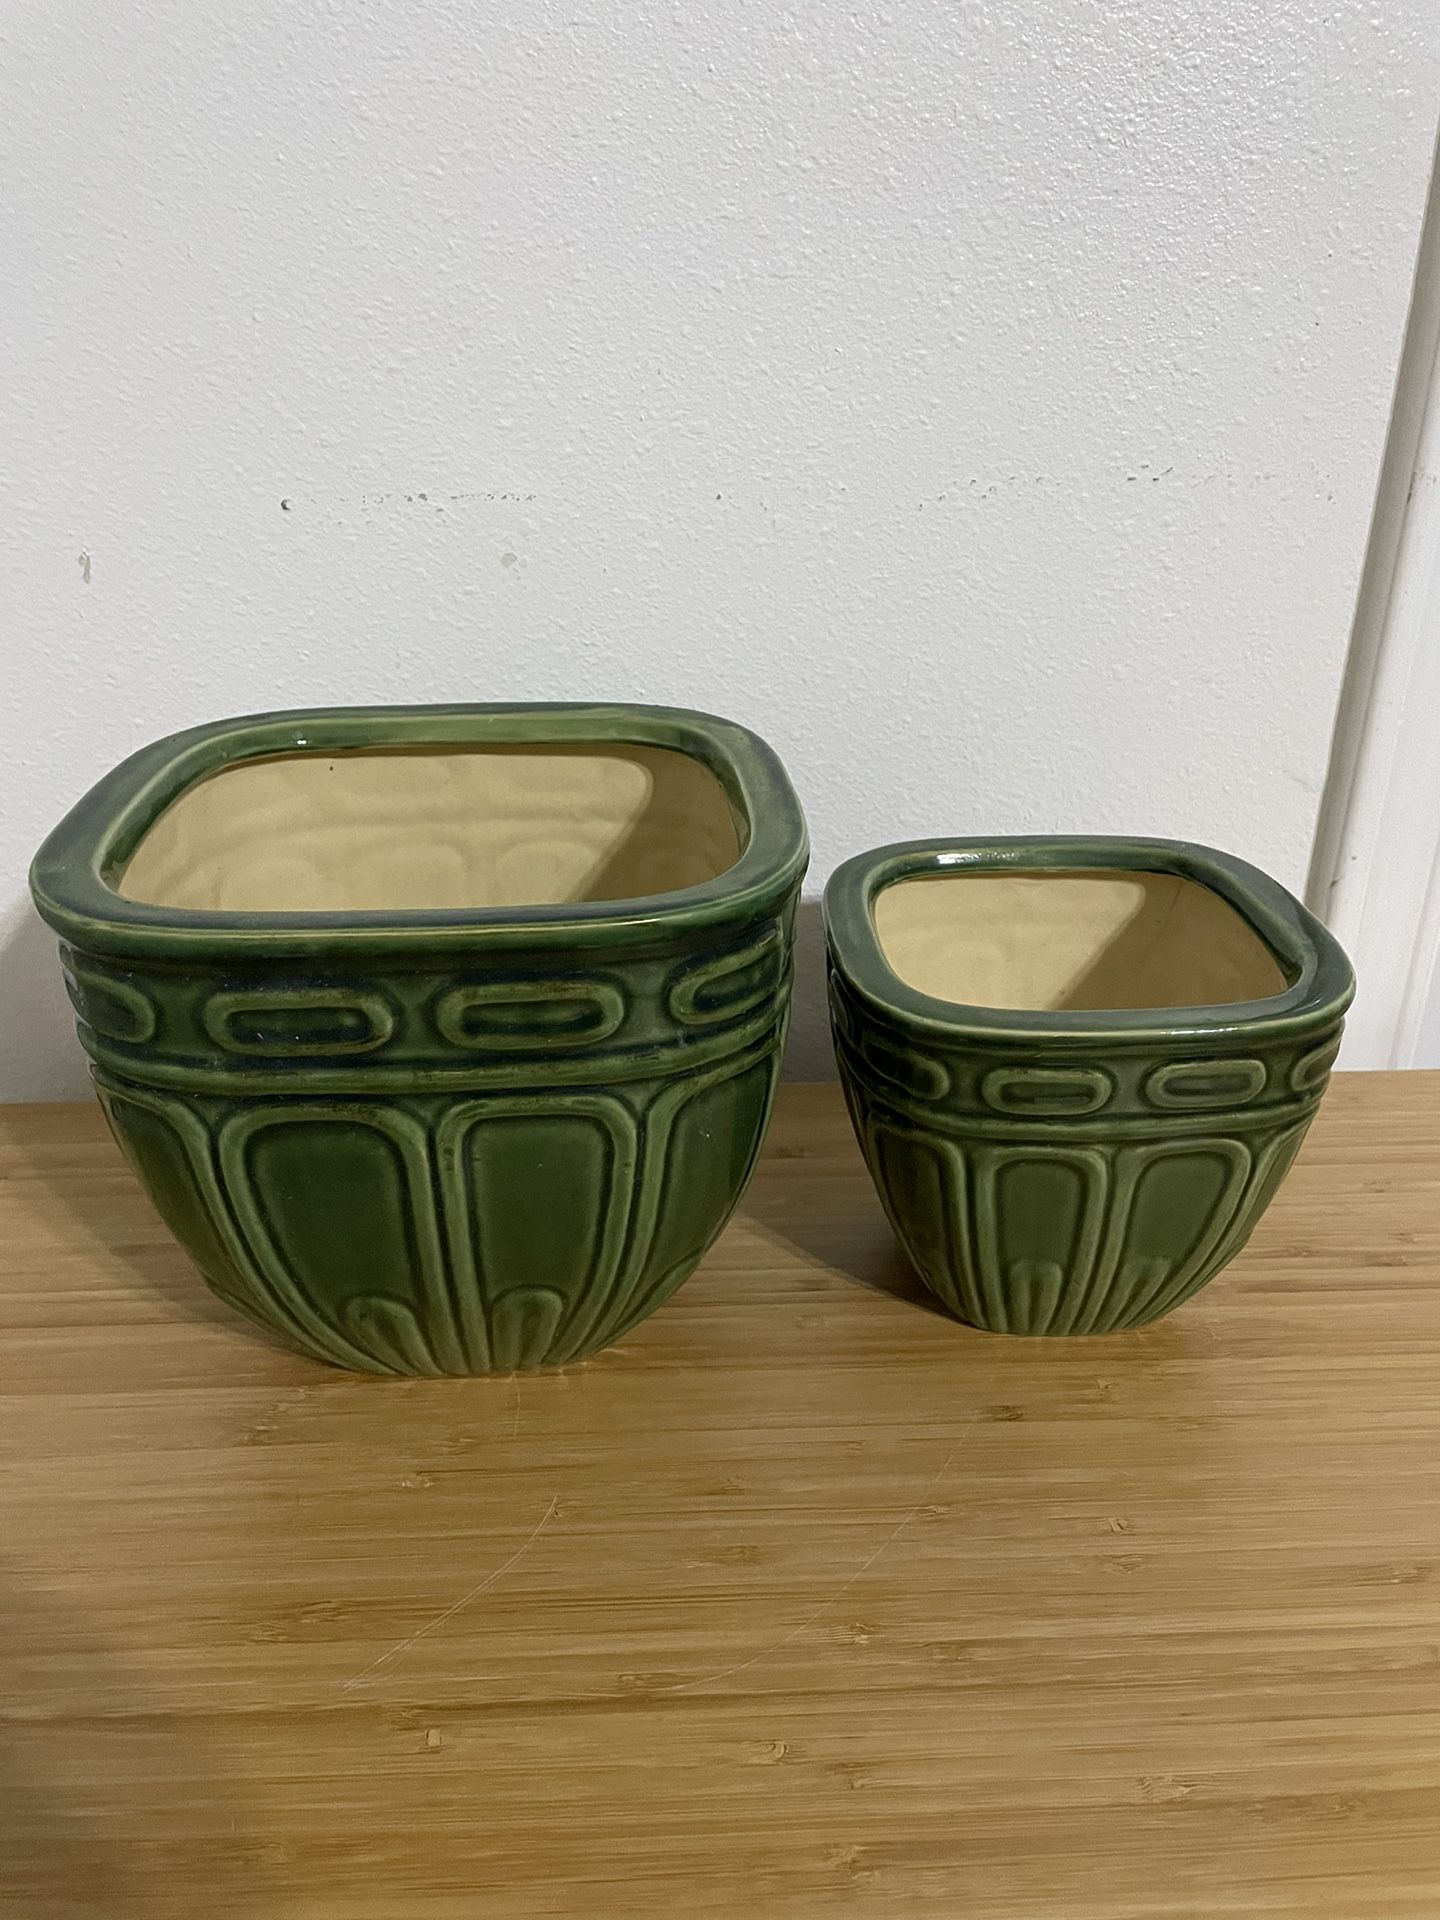 Matching Pair Of Ceramic Planters (7” and 6” tall)